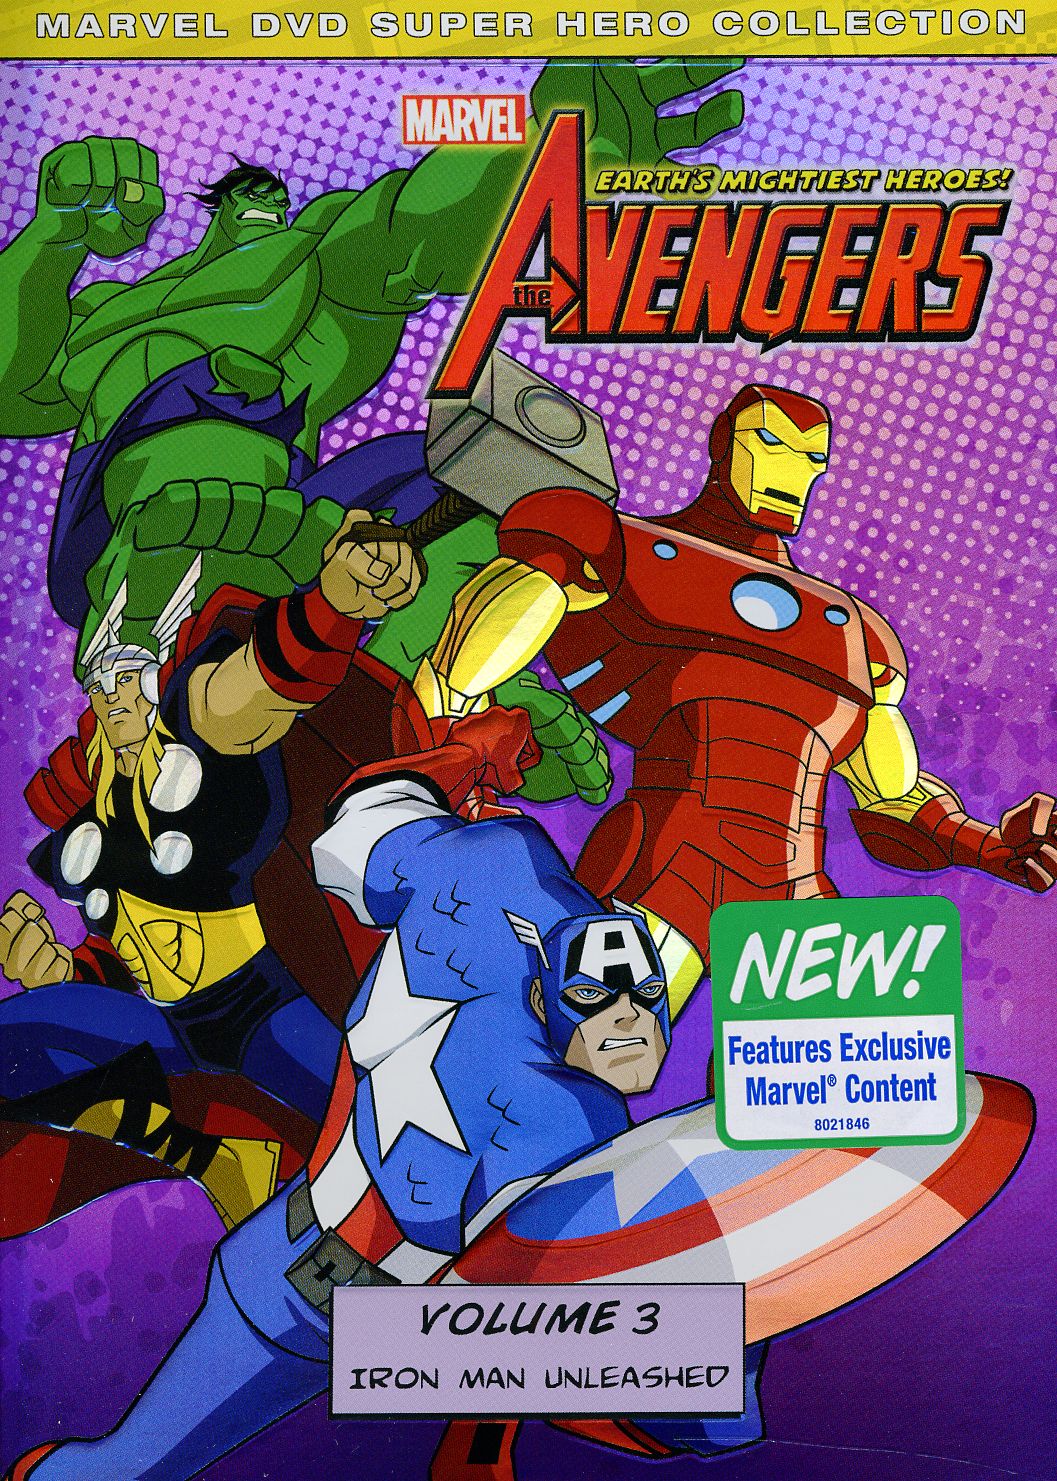 MARVEL THE AVENGERS: EARTH'S MIGHTIEST HEROES 3